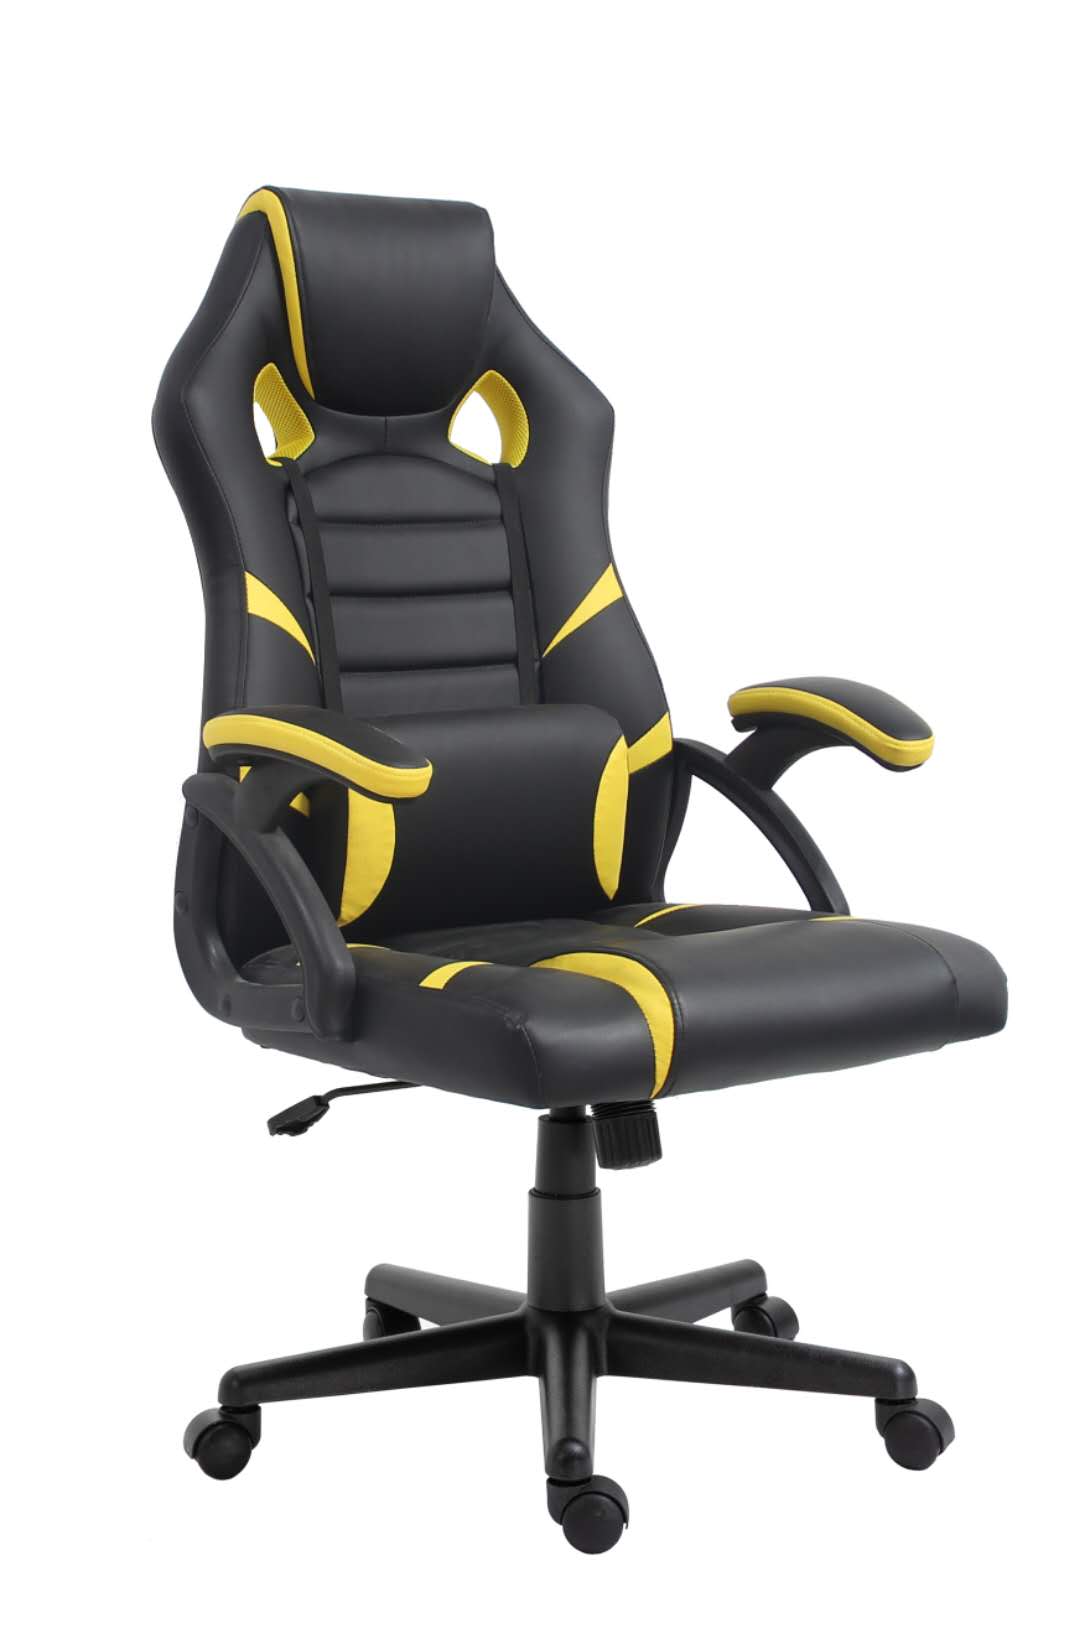 GAMING CHAIR OFFICE CHAIR RACING CHAIR Dealsdirect.co.nz